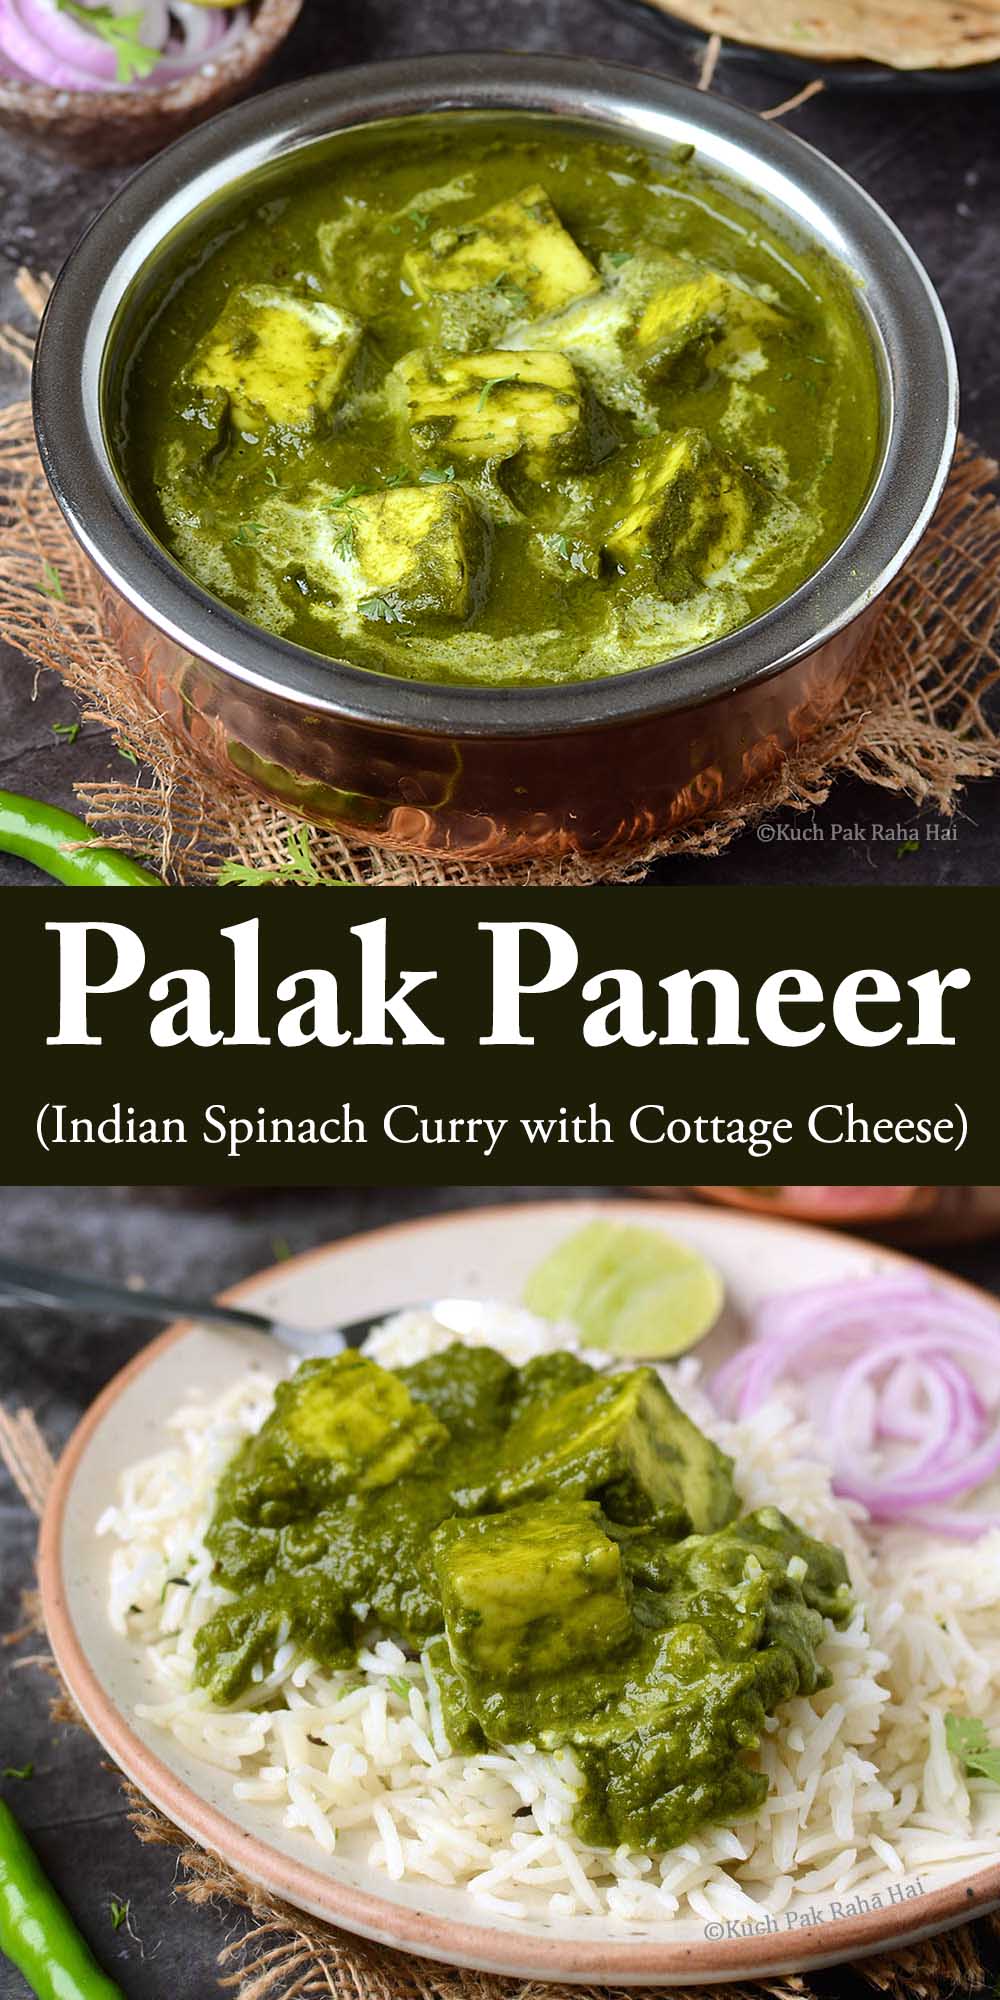 Palak Paneer or Indian spinach Curry with cottage cheese